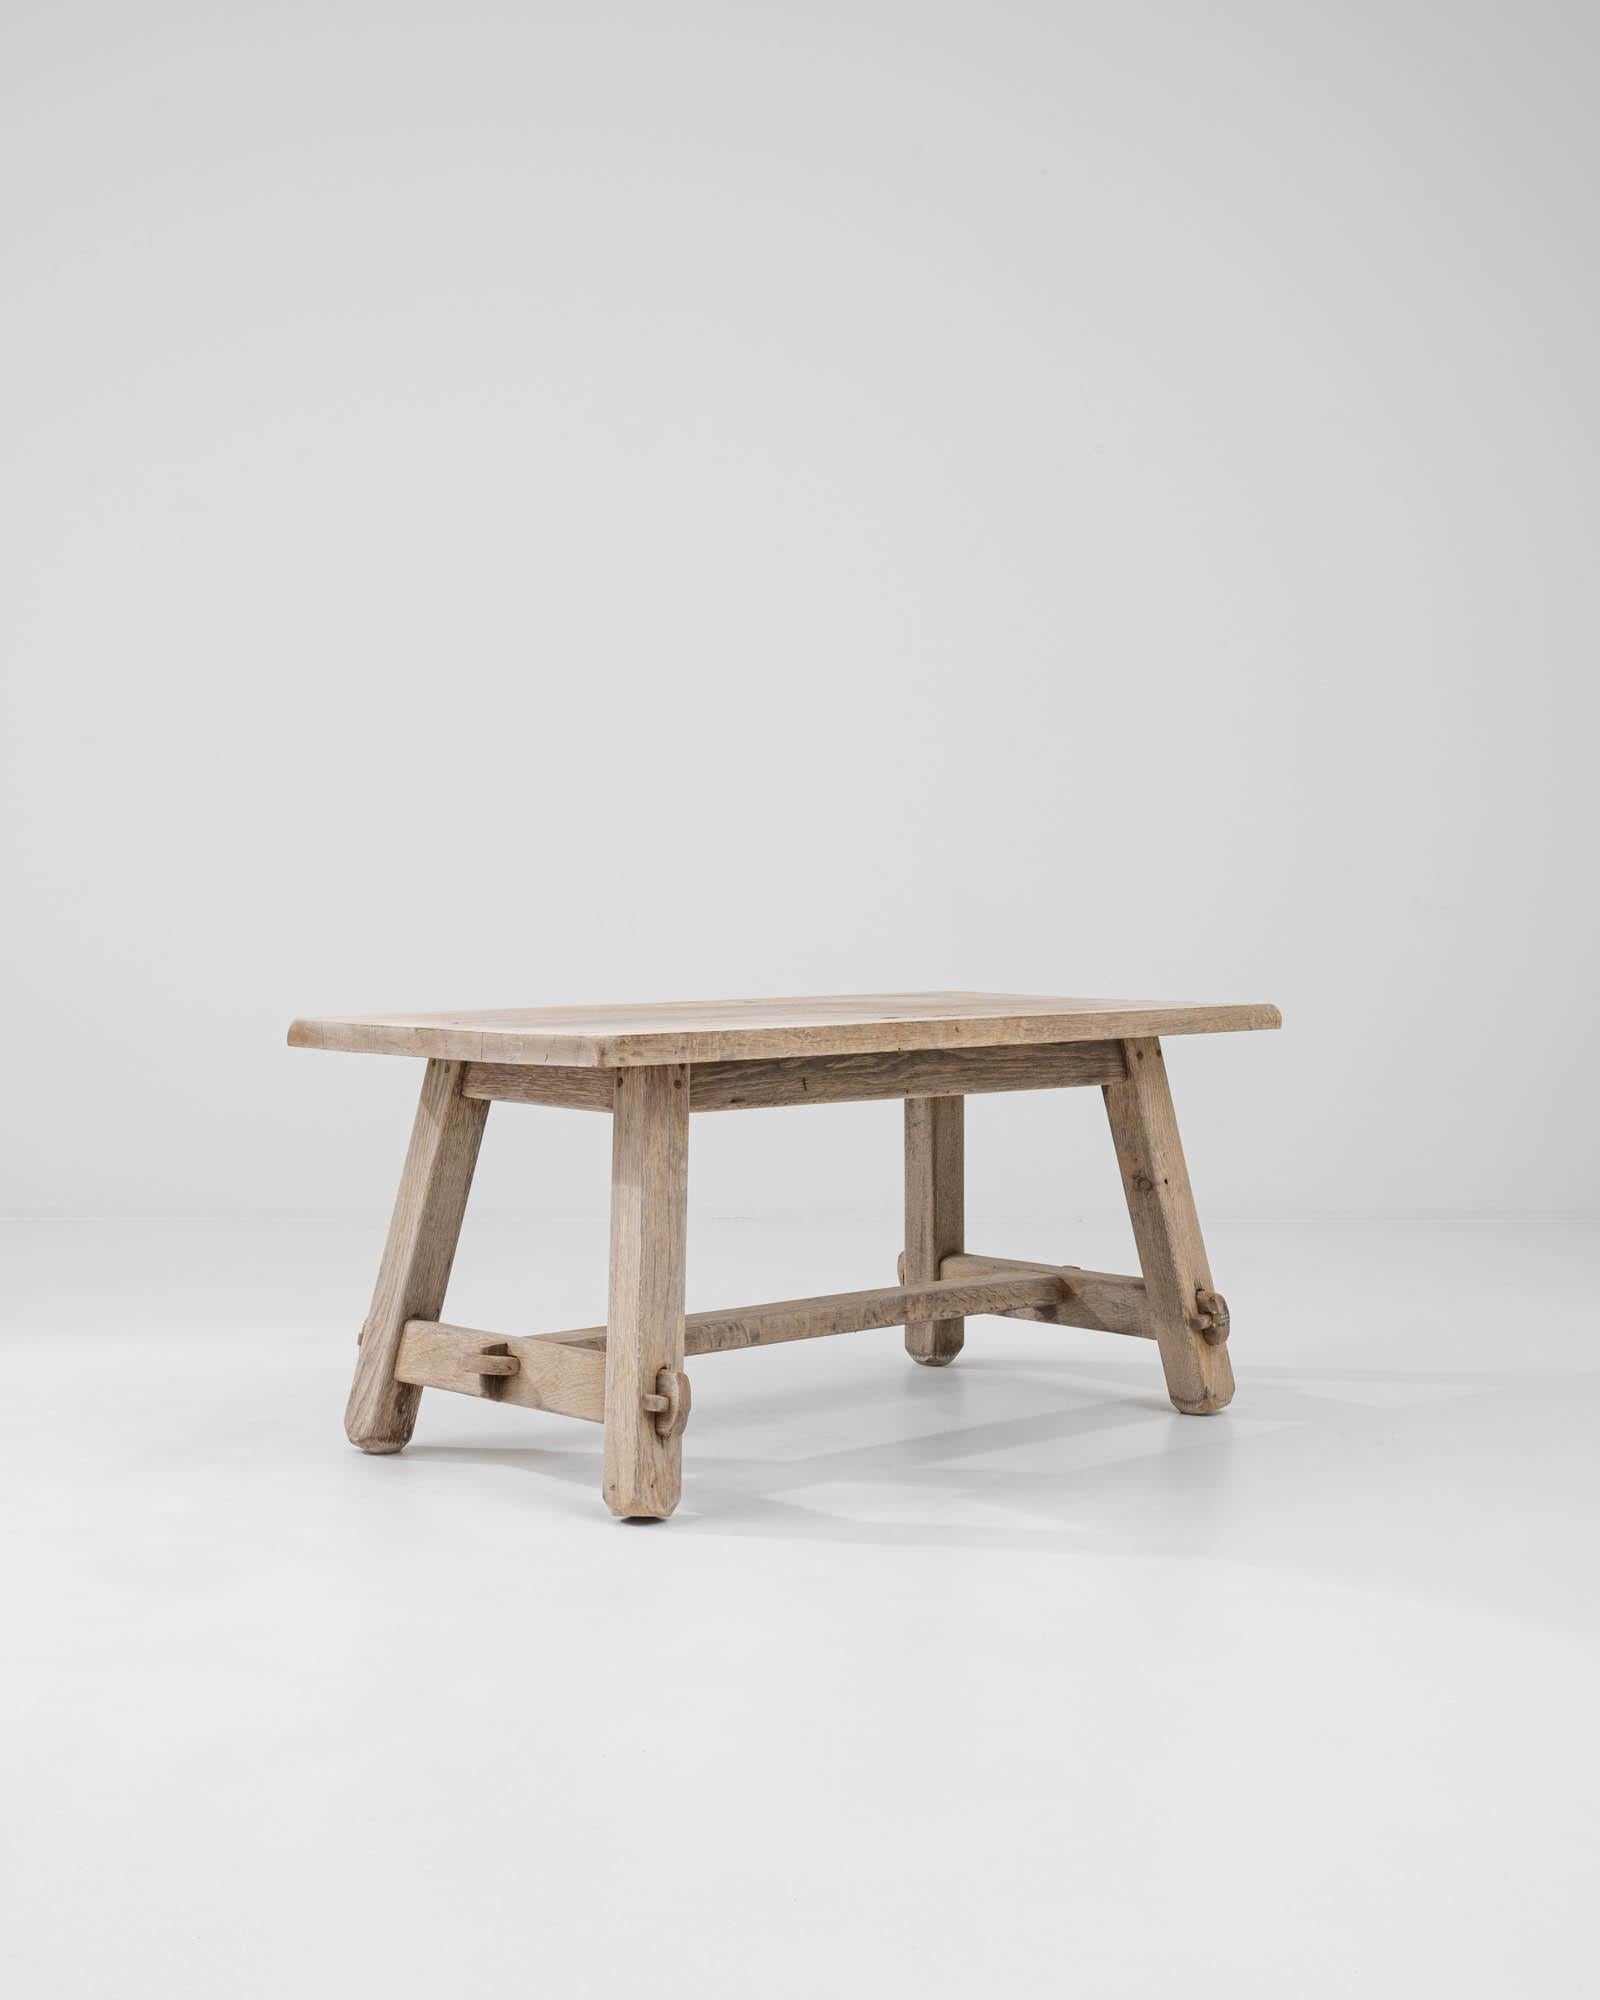 A wooden coffee table created in 20th century Belgium. This charming table exemplifies a practice of lightly altering natural materials to achieve an artful combination of organic and thoughtful design. With an unassuming trestle construction and